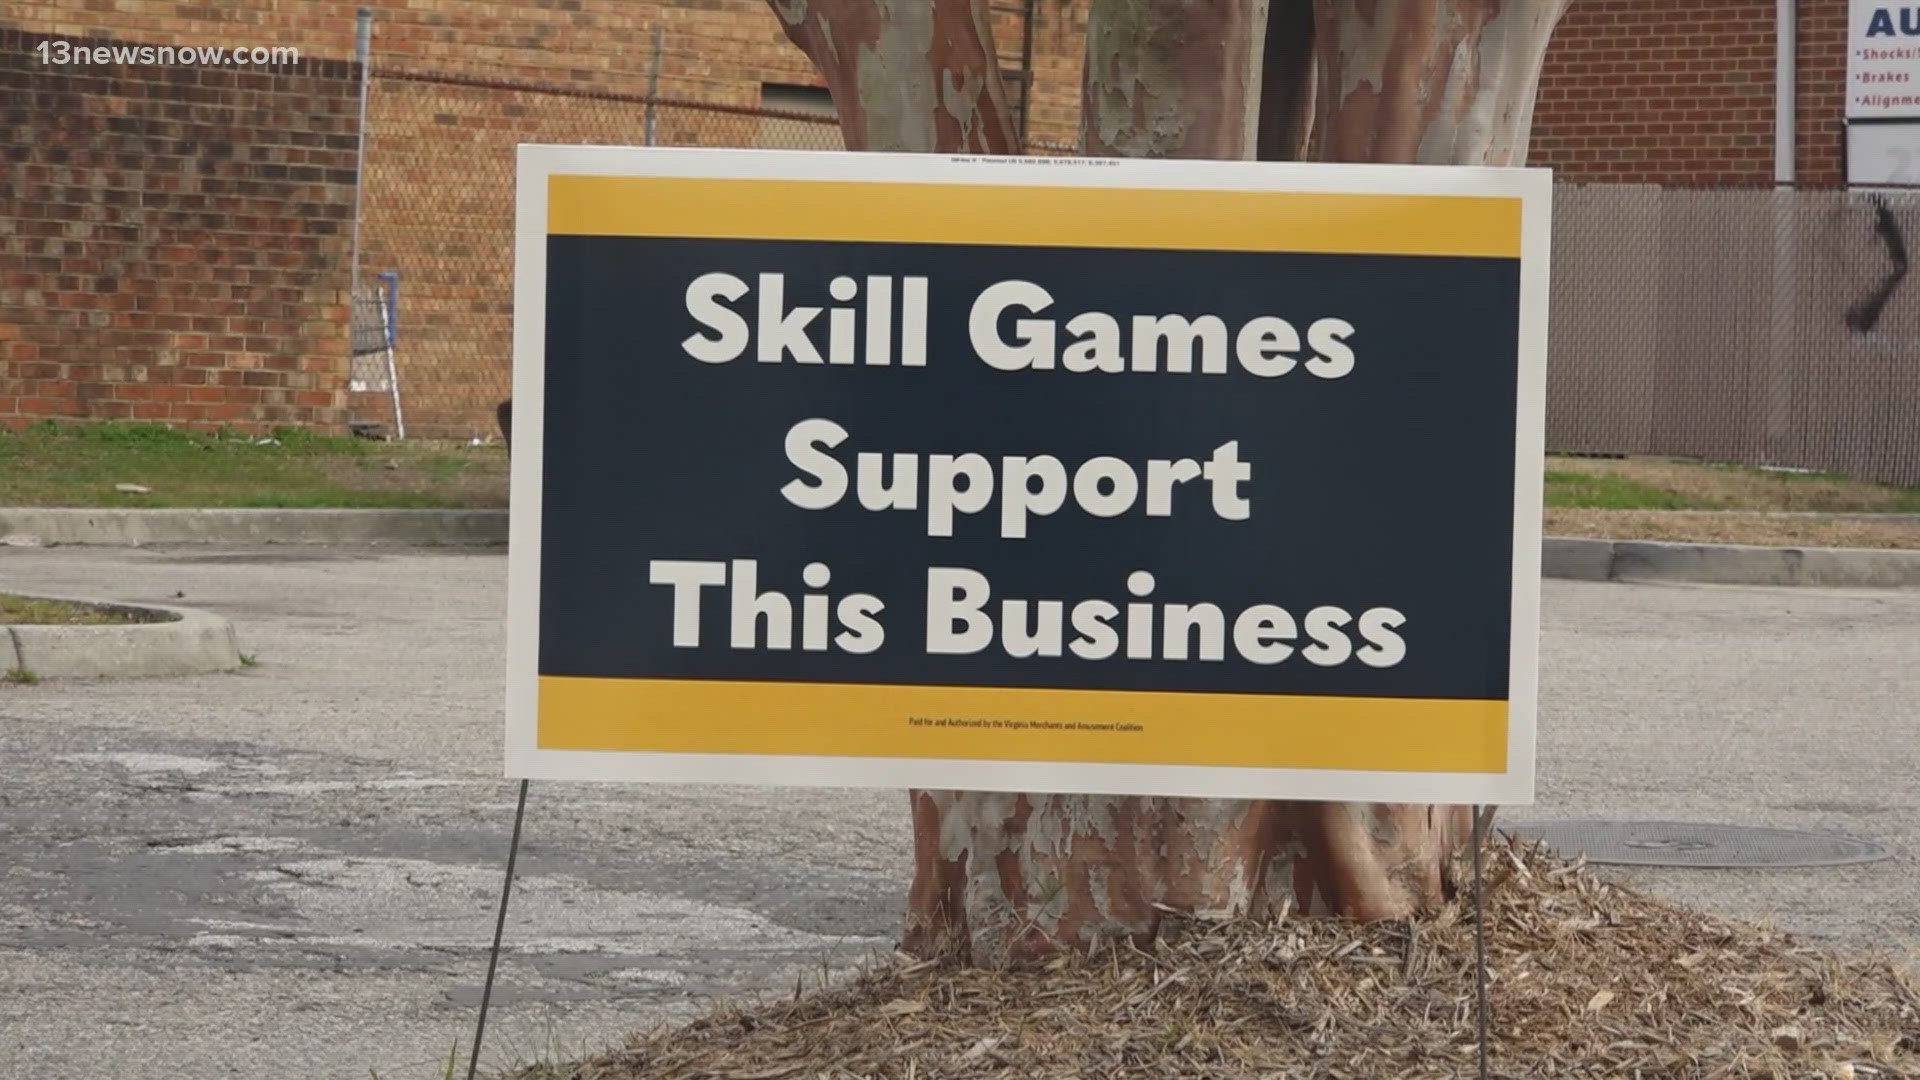 Senator Bill DeSteph held a community discussion in support of relegalizing skill games.